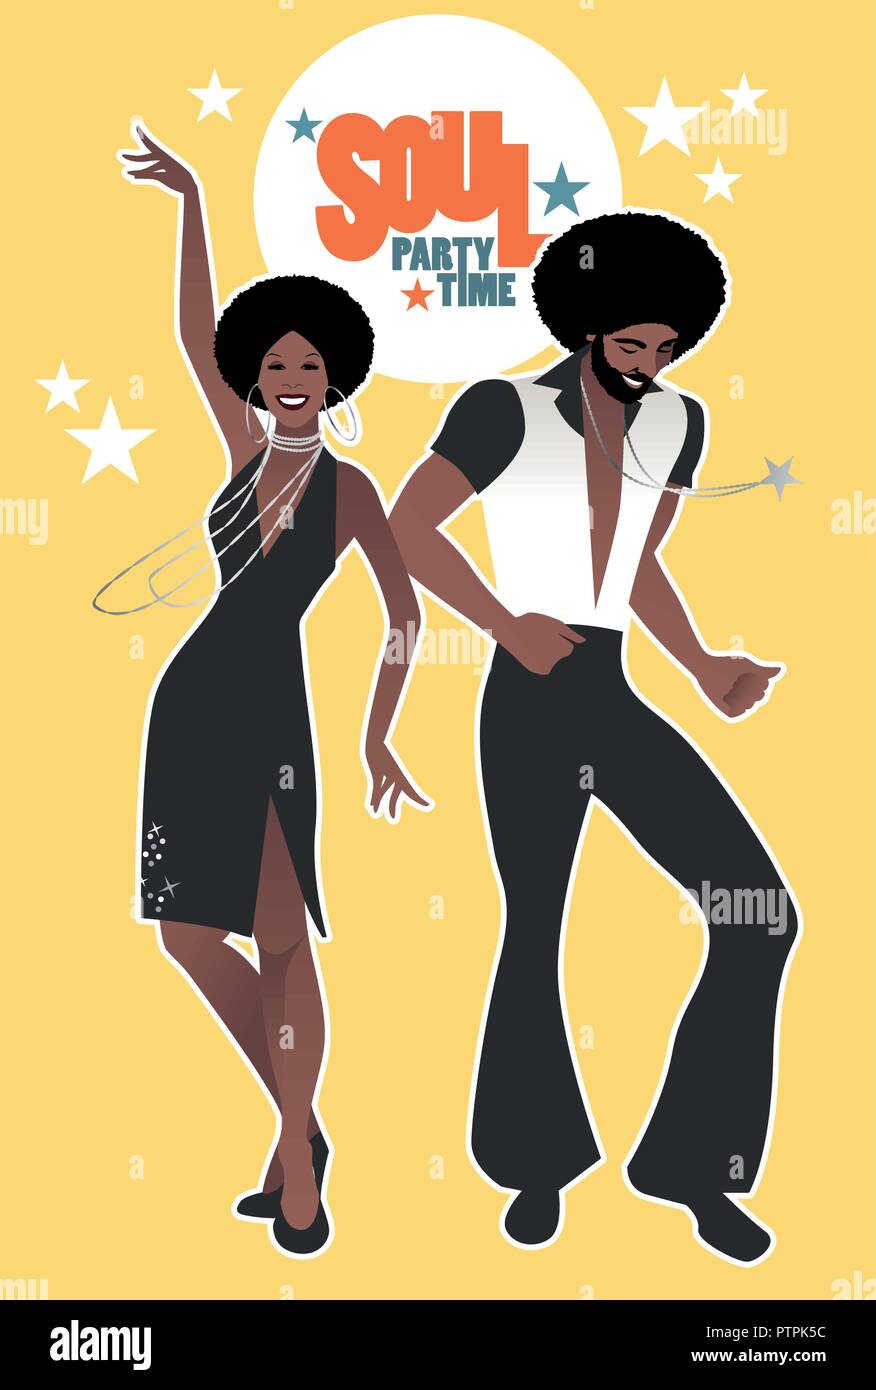 Soul Party Time. Young couple dancing soul, funk or disco. Retro